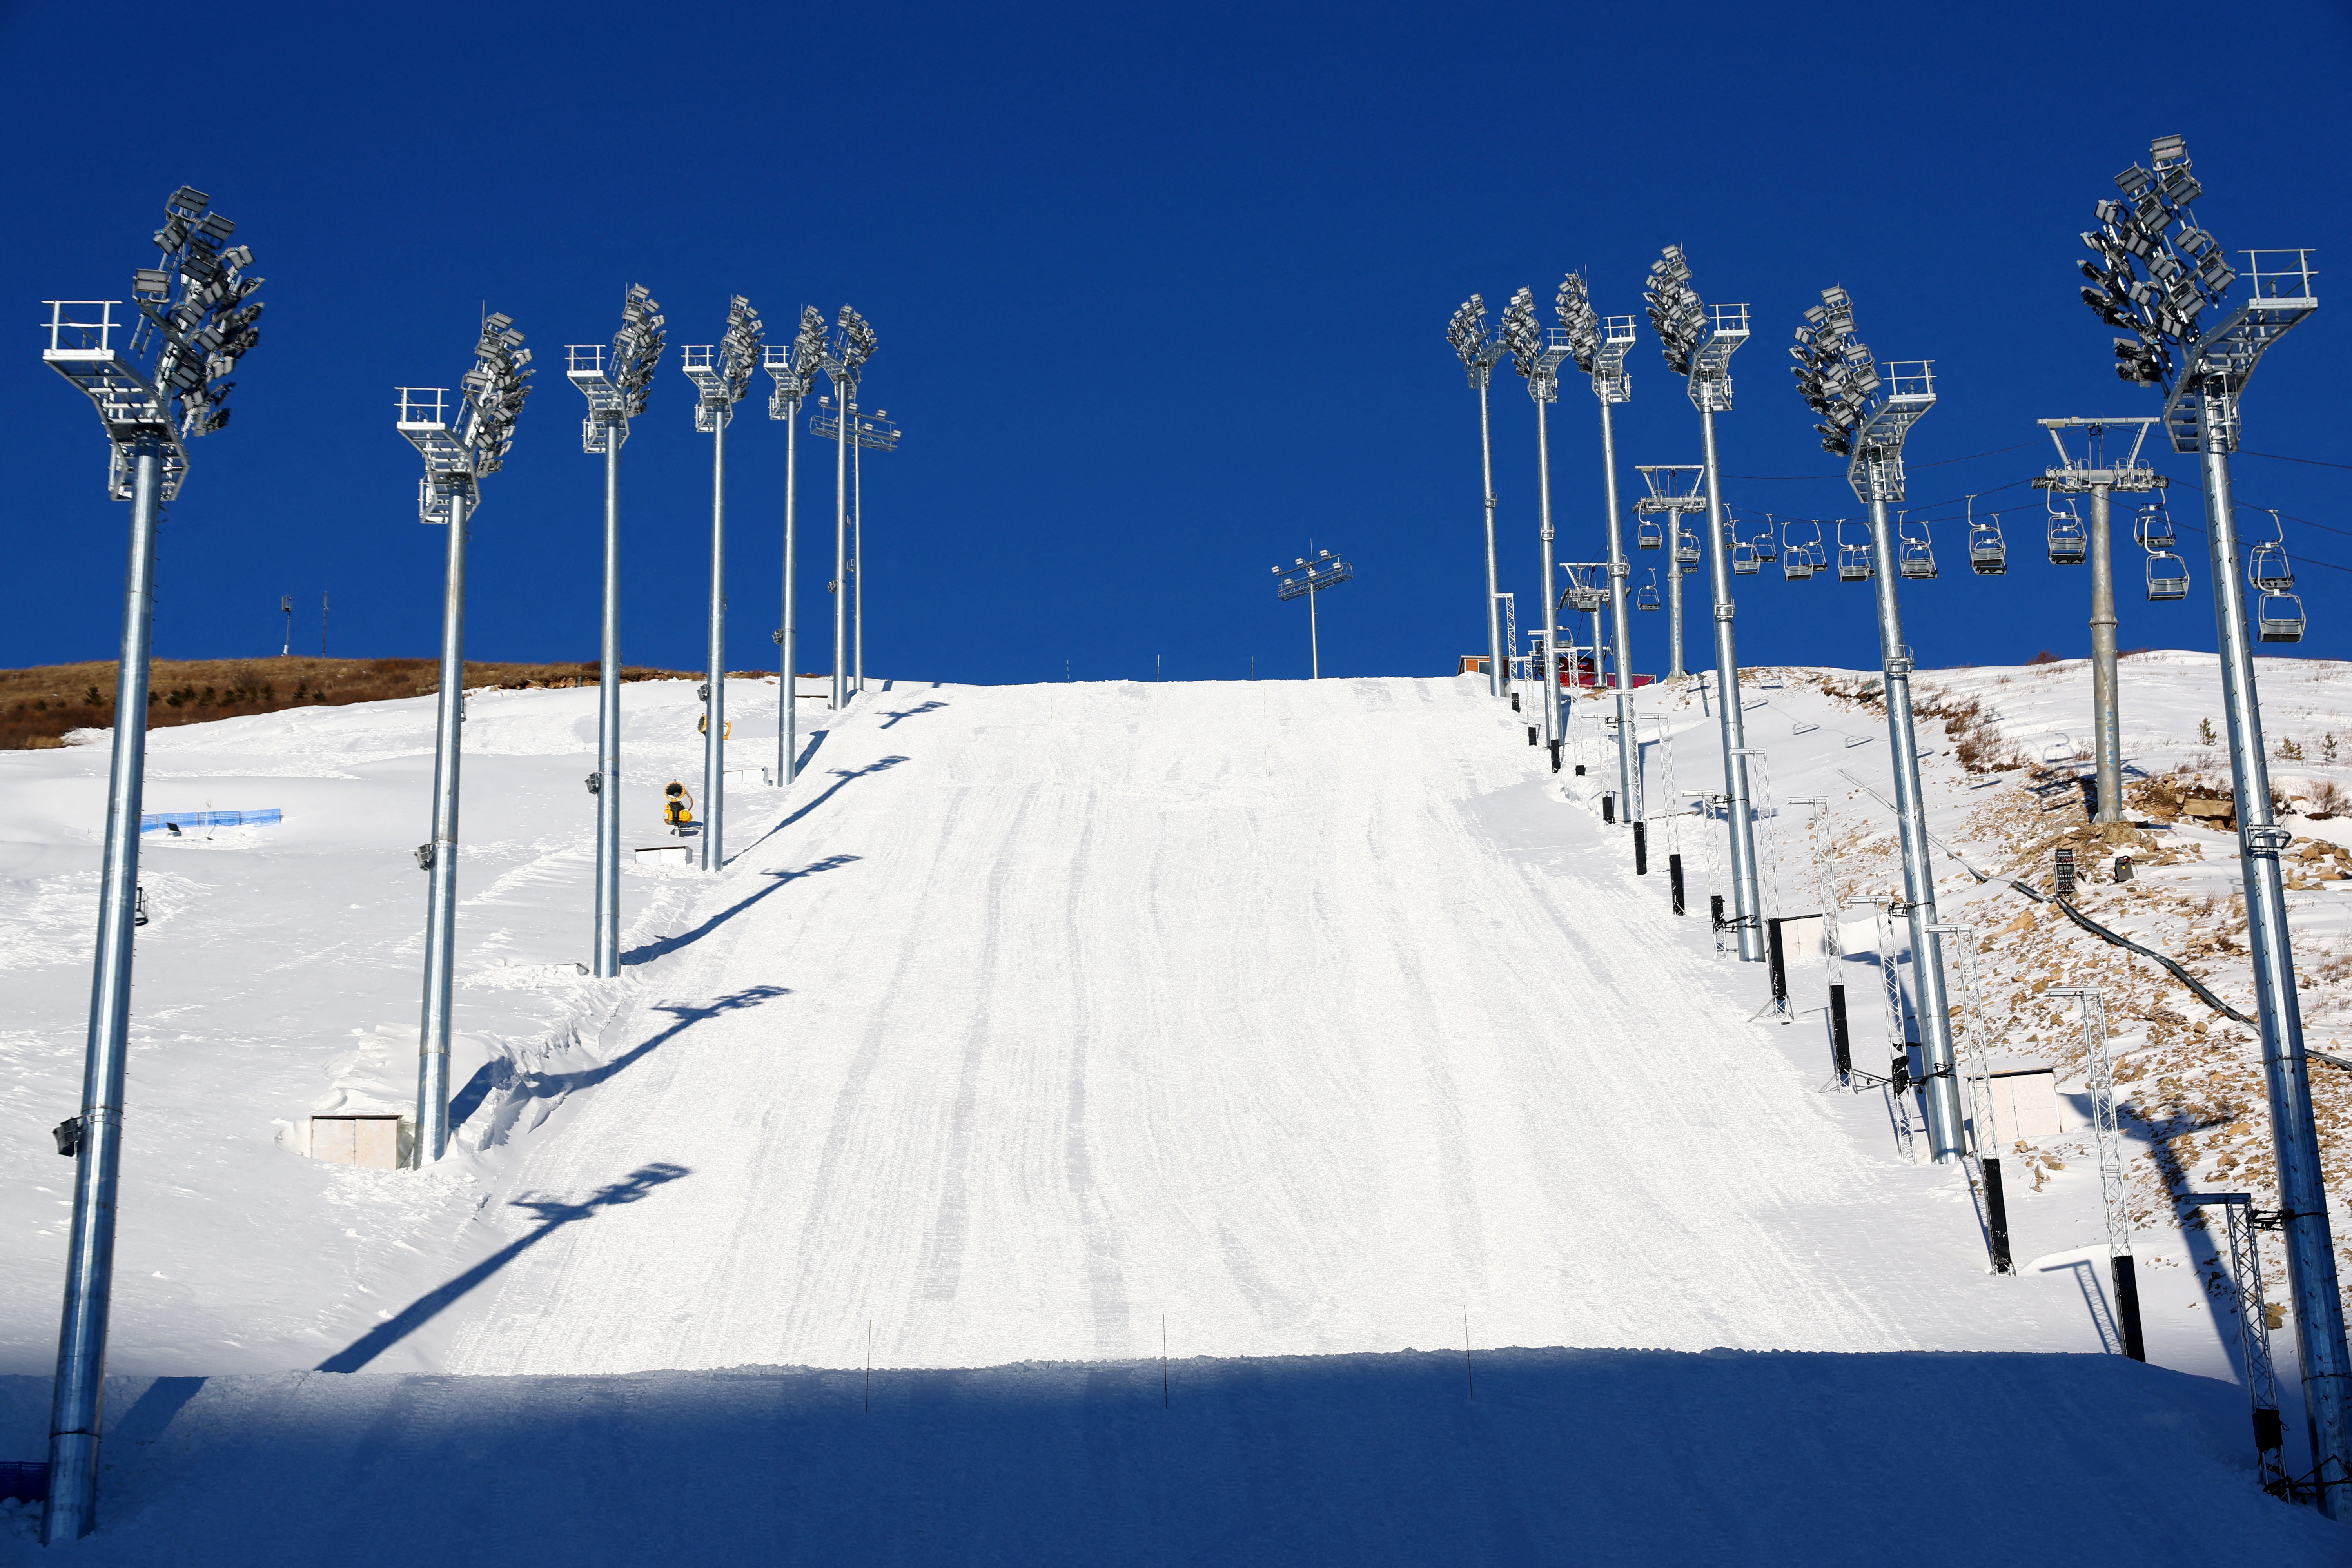 Genting Snow Park, a competition venue for Snowboarding and Freestyle Skiing during the Beijing 2022 Winter Olympics, is seen in Beijing